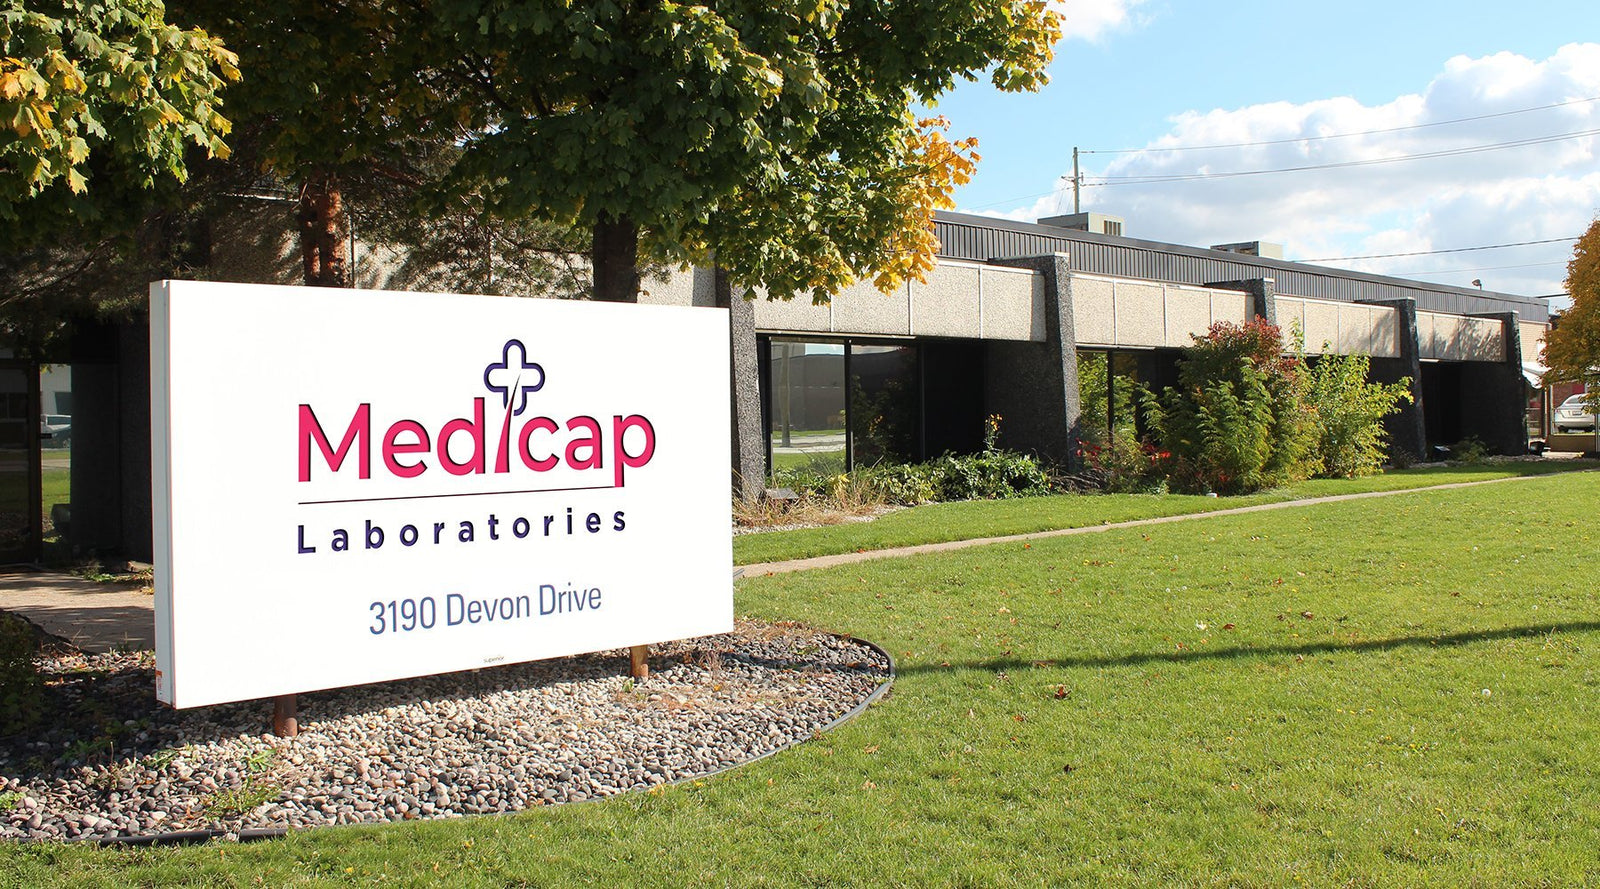 47Billion is Strengthening its Academia Association with Medicaps  University to Upskill the Future Talent